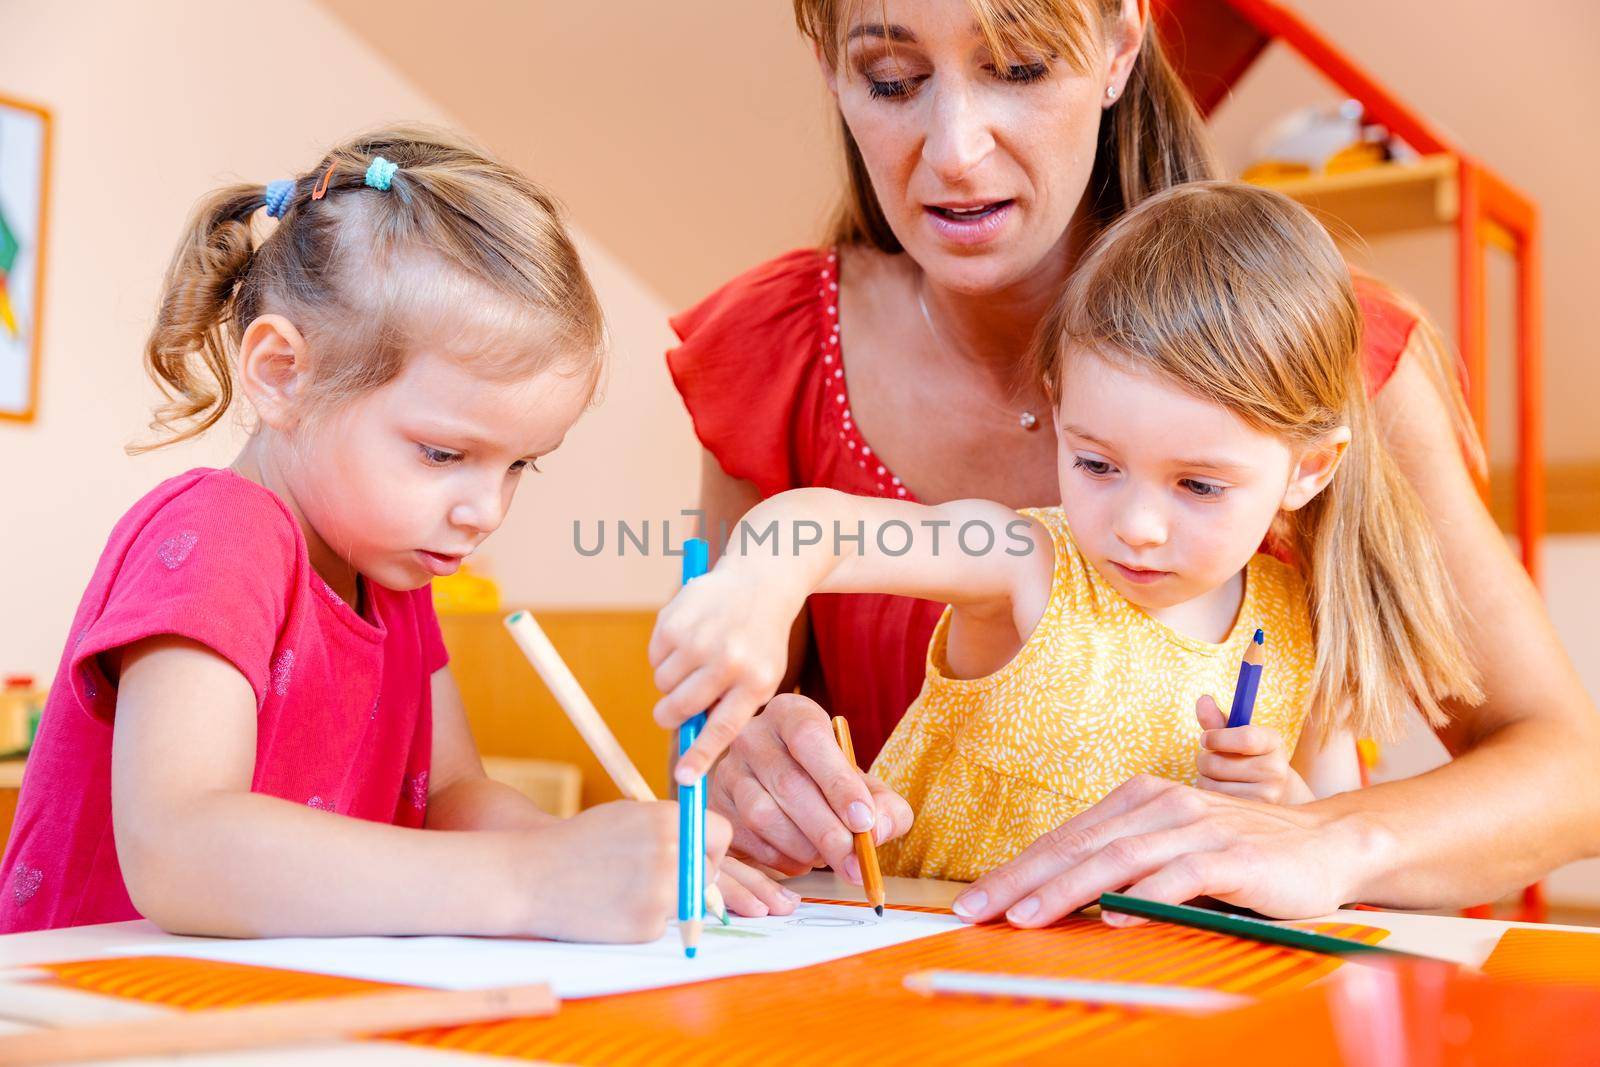 Children and play school teacher drawing together with pencils